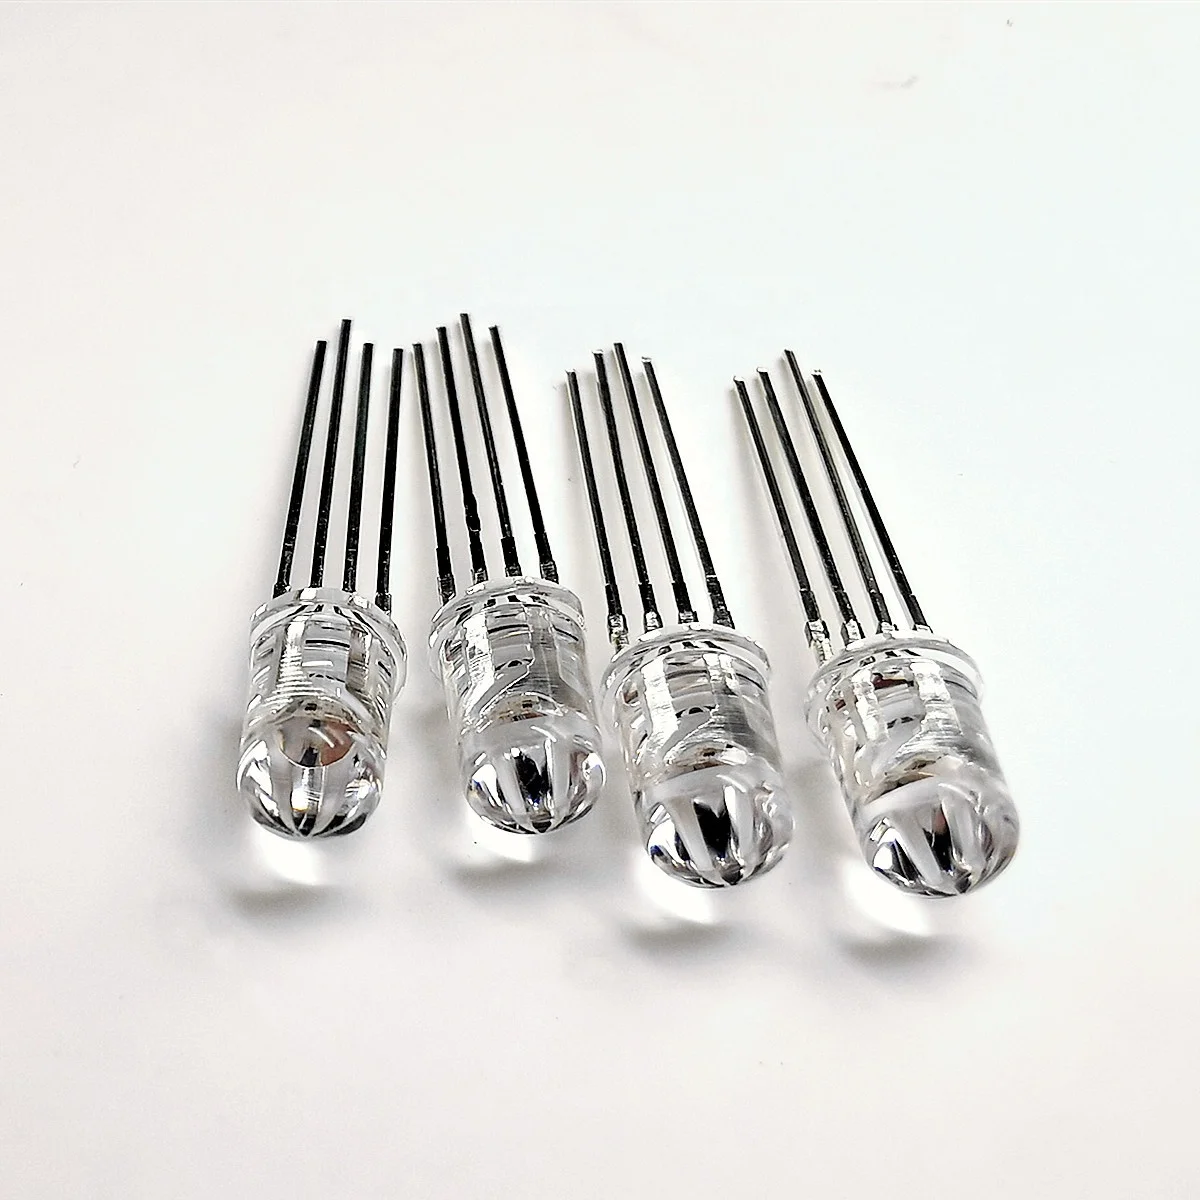 Kento 5ARGB4UCA High Quality 5mm 4pins RGB LED Light Emitting Diode With Water Clear Lens